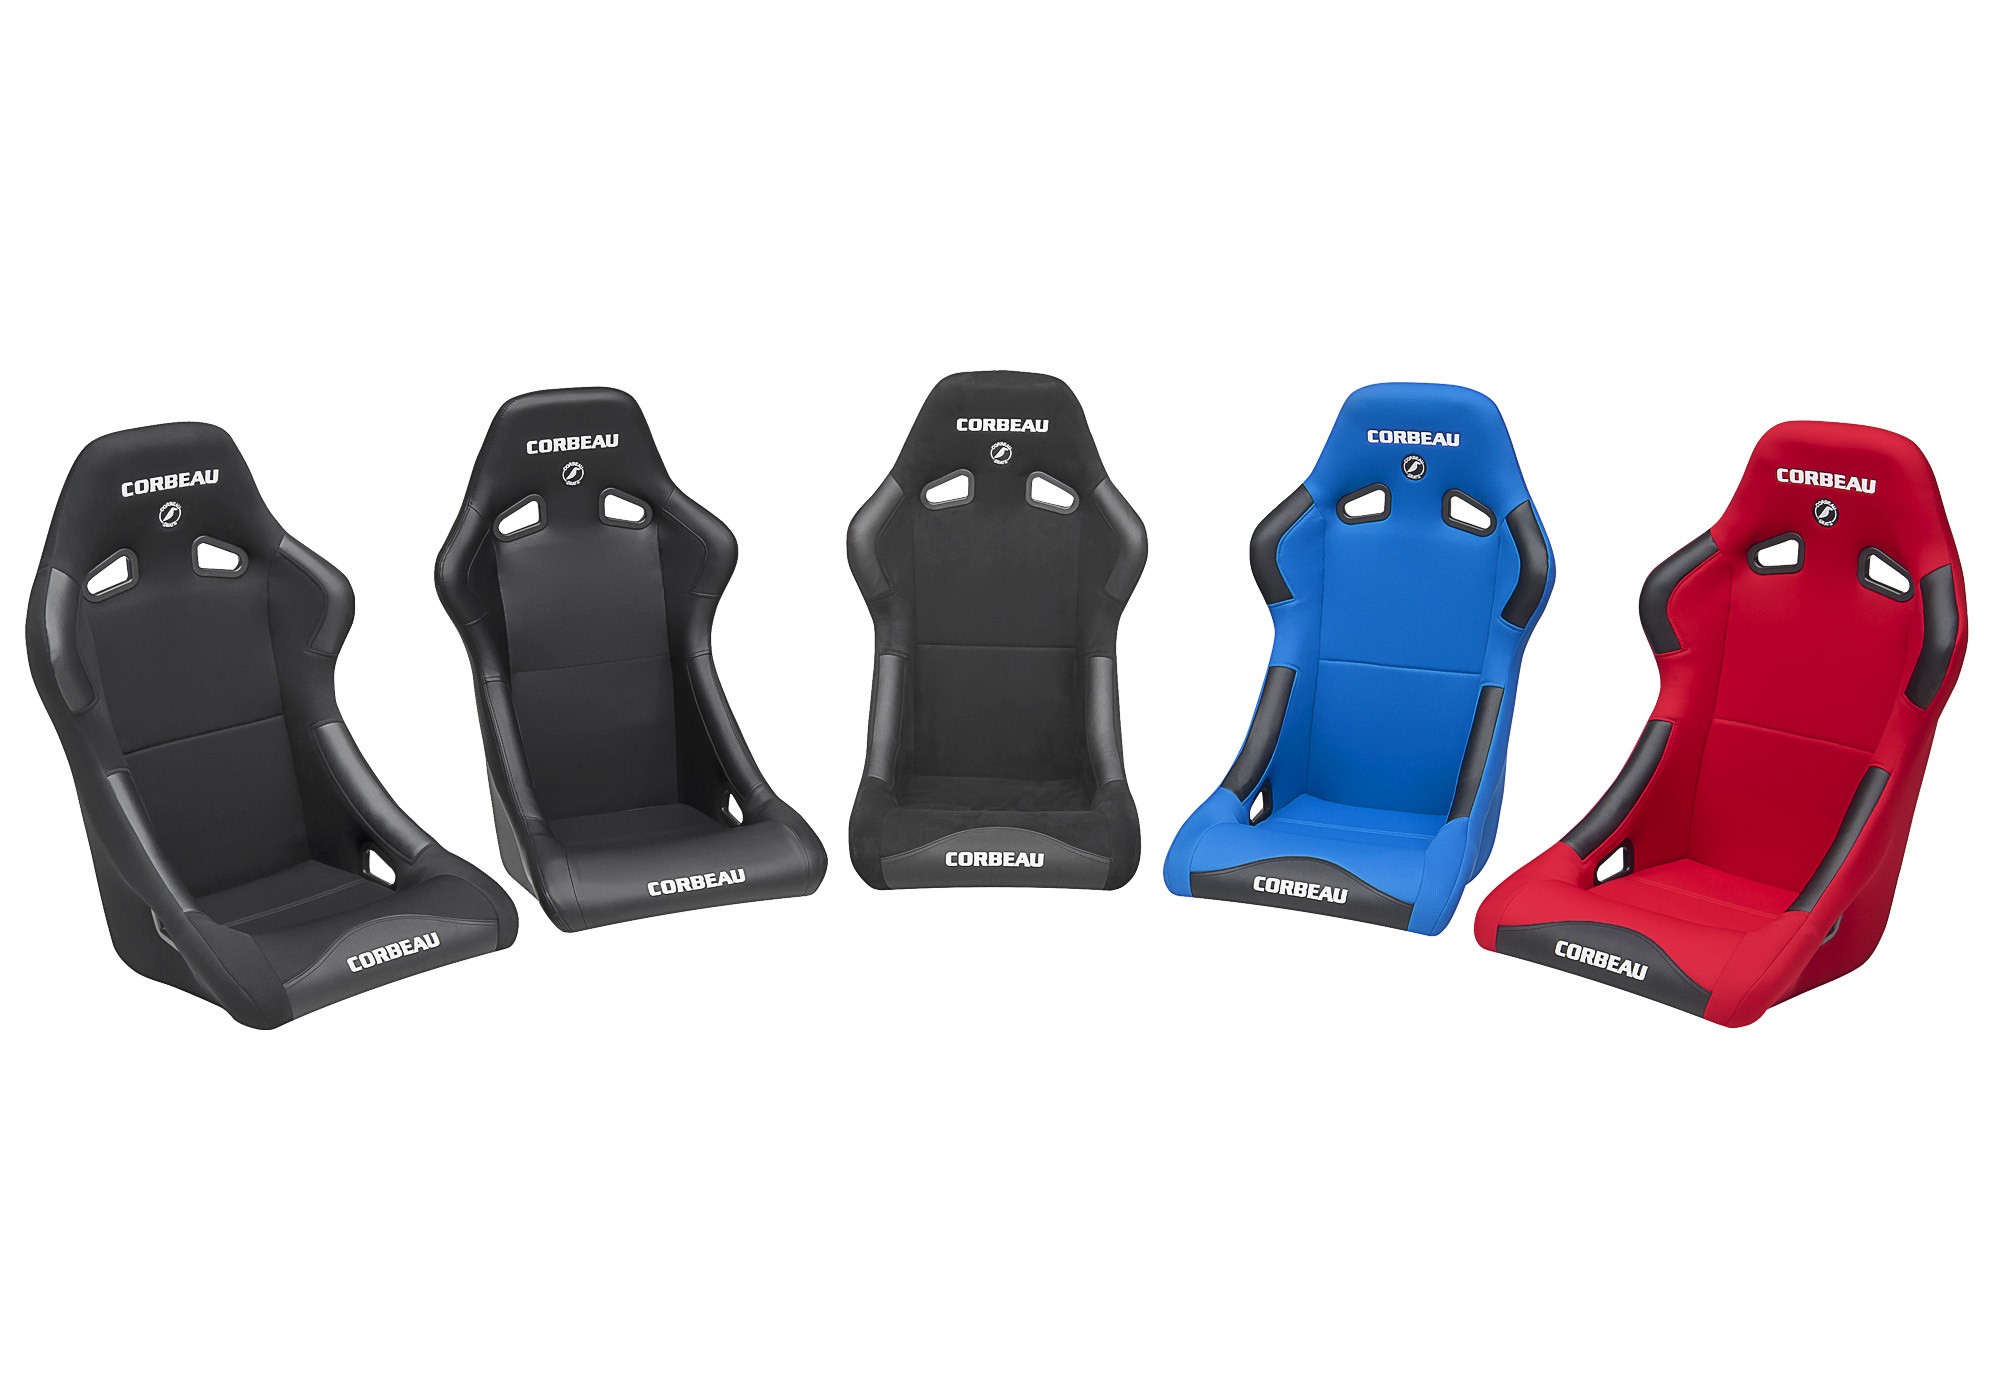 C5 or C6 Corvette Corbeau Forza Racing Seat, Cloth, Vinyl or Suede Material